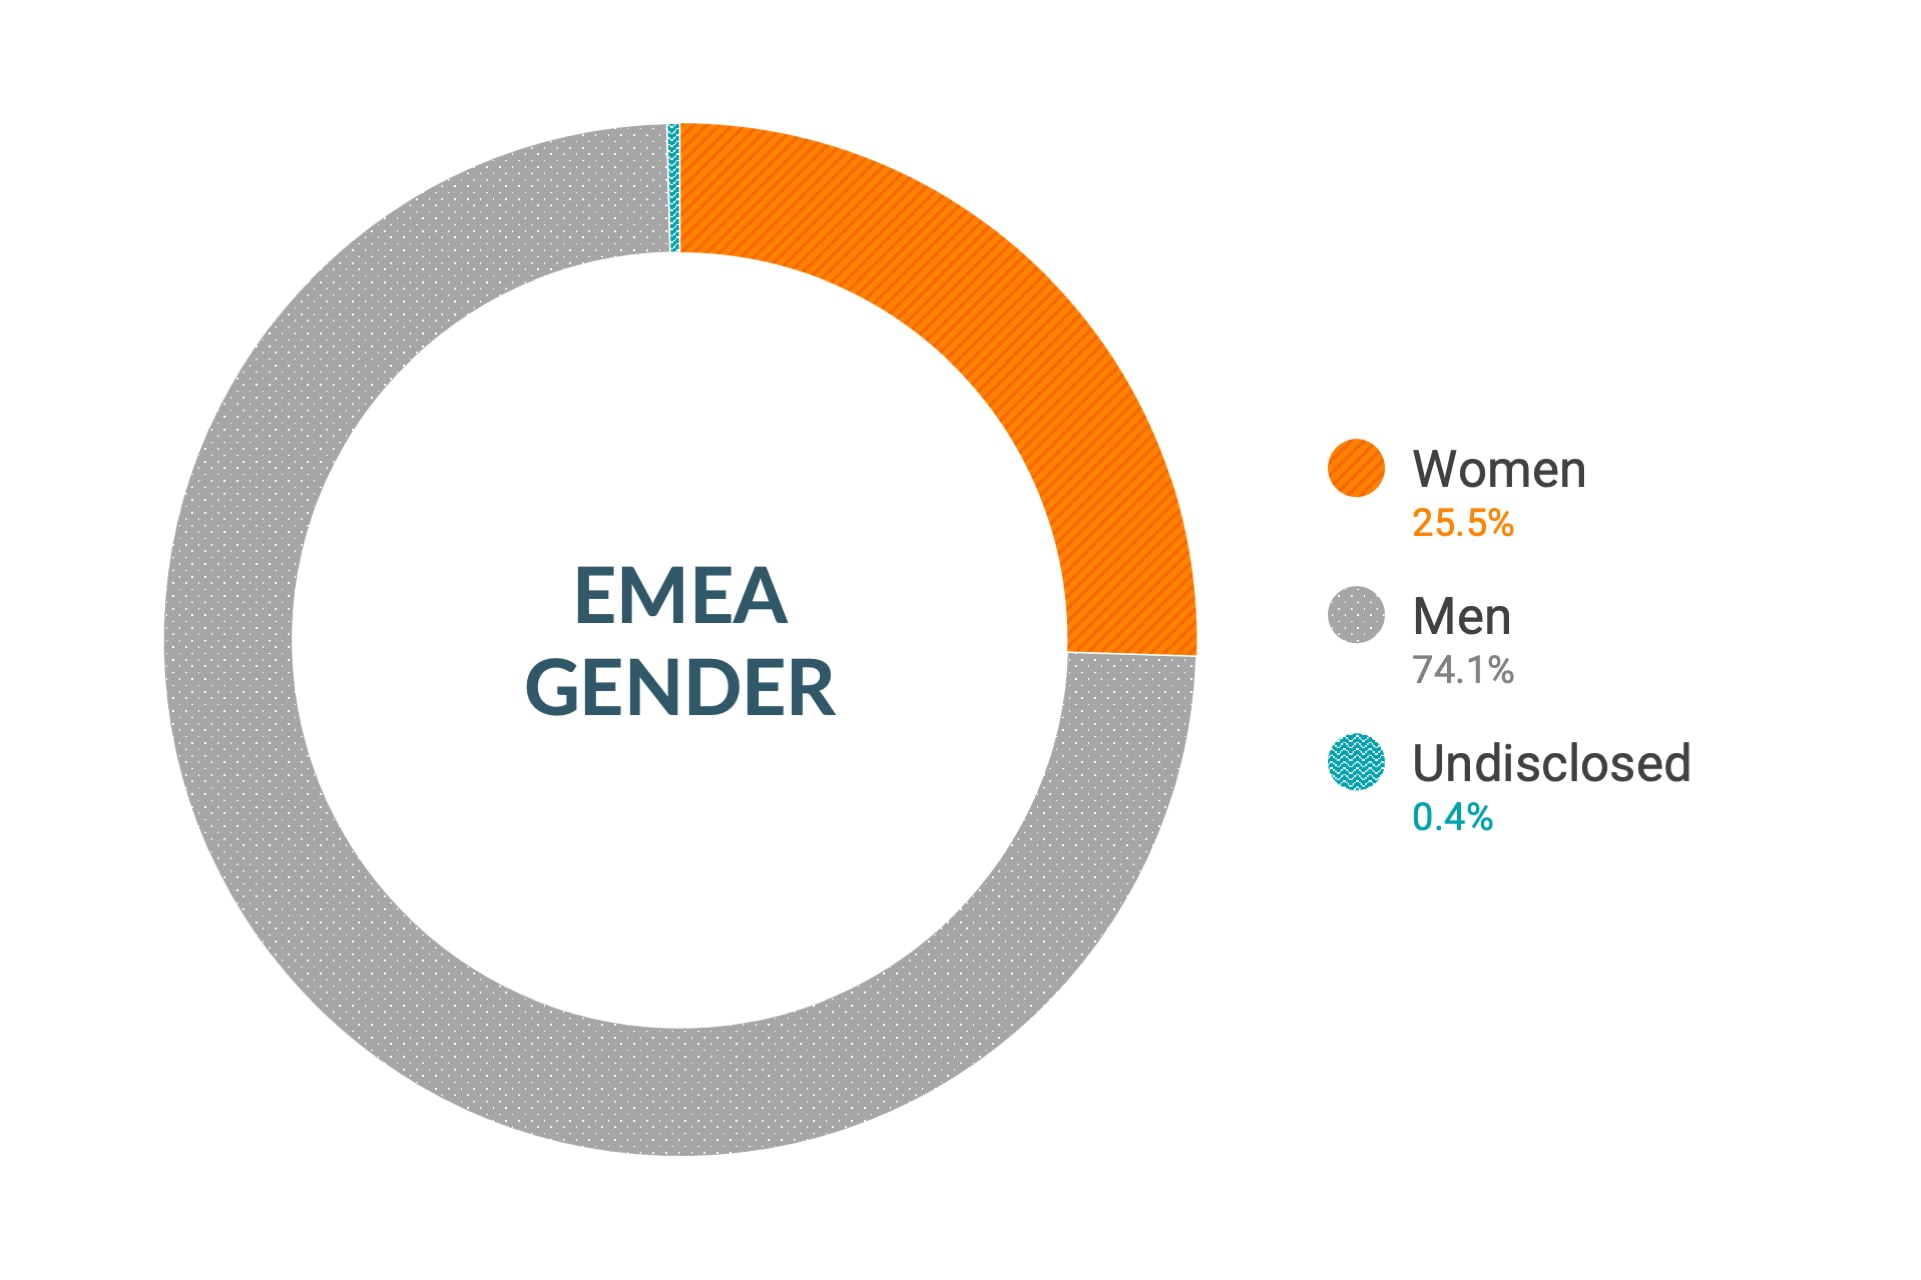 Cloudera Diversity and Inclusion data for EMEA Gender: Women 25.5%, Men 74.1%, Undisclosed 0.4%